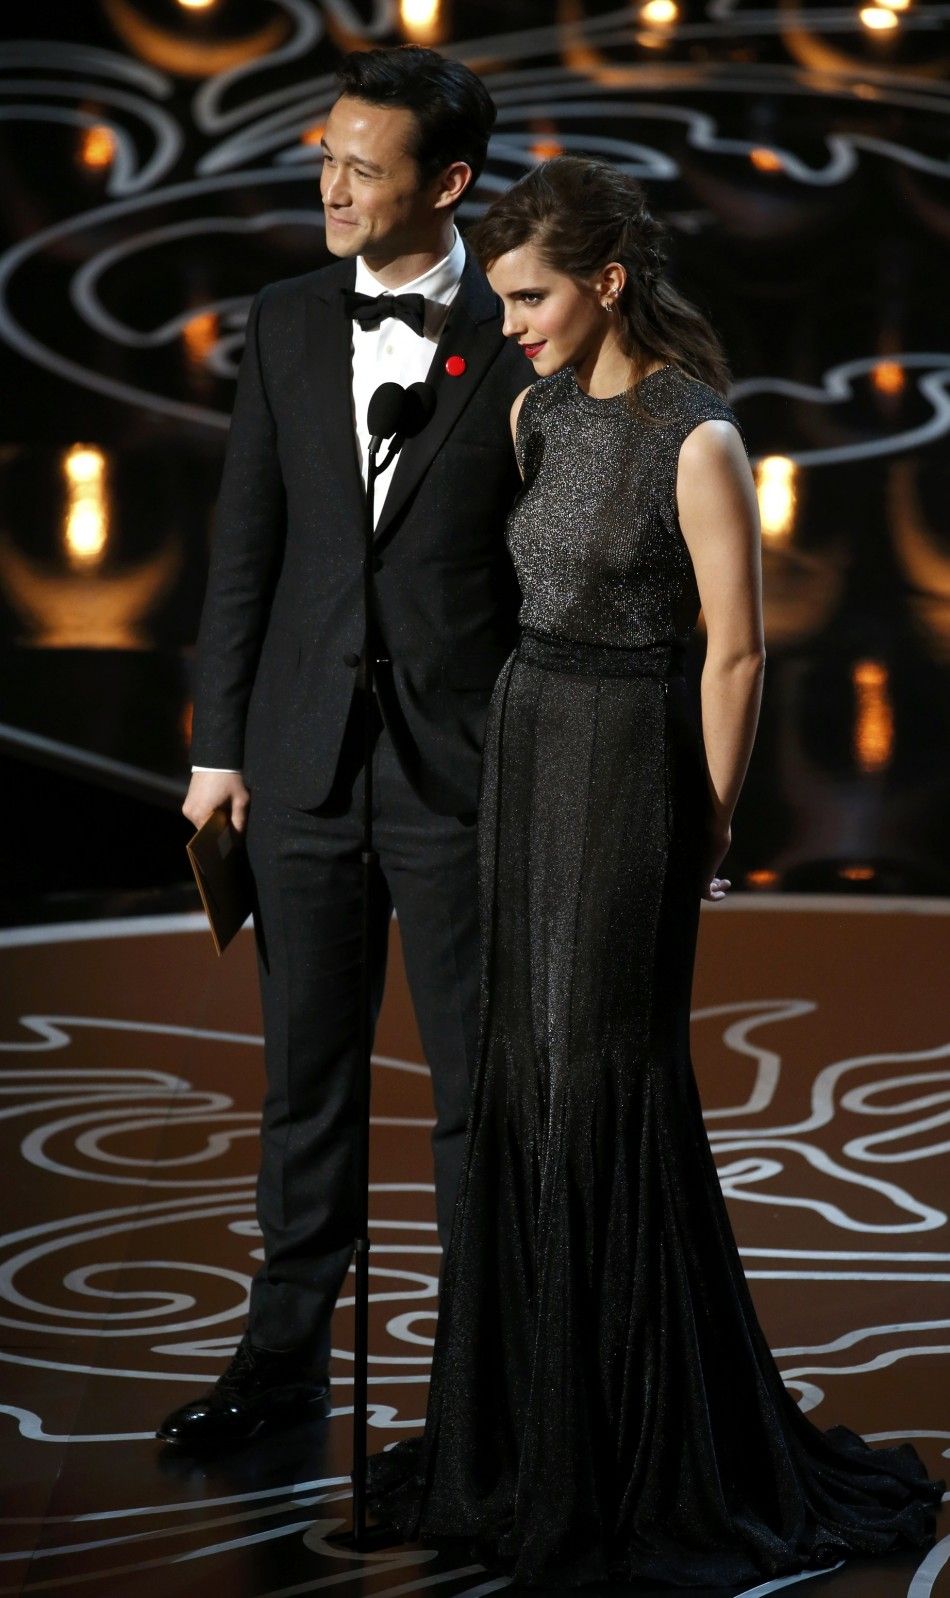 Actors Watson and Gordon-Levitt present the award for visual effects at the 86th Academy Awards in Hollywood